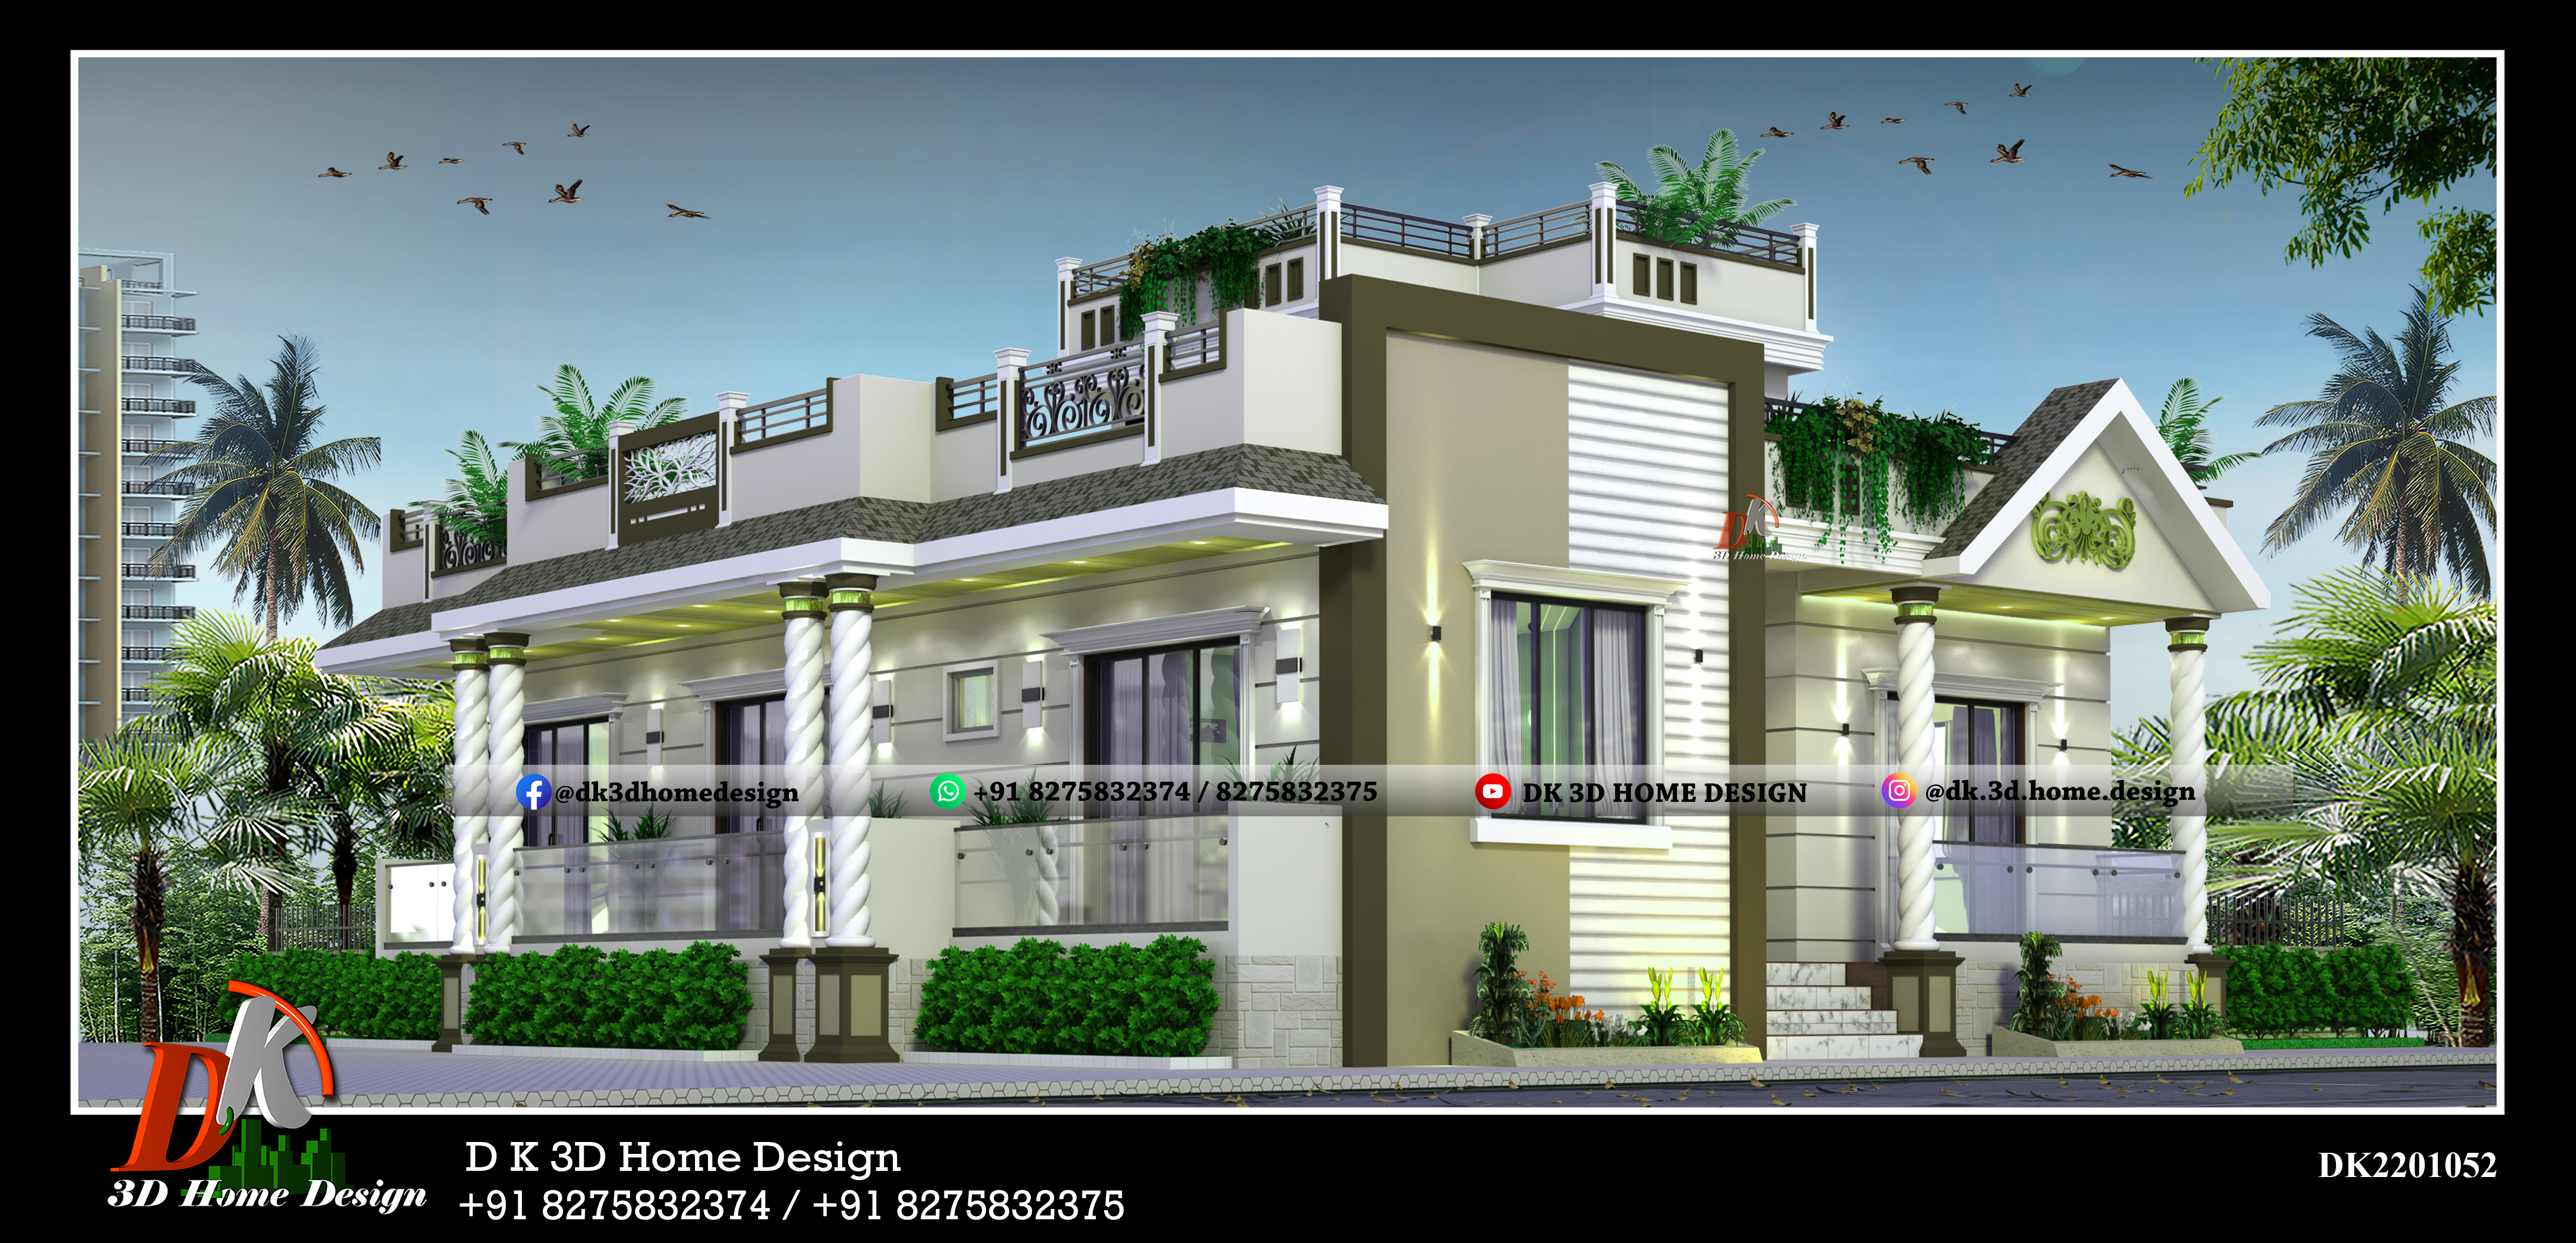 elevation design of single story home